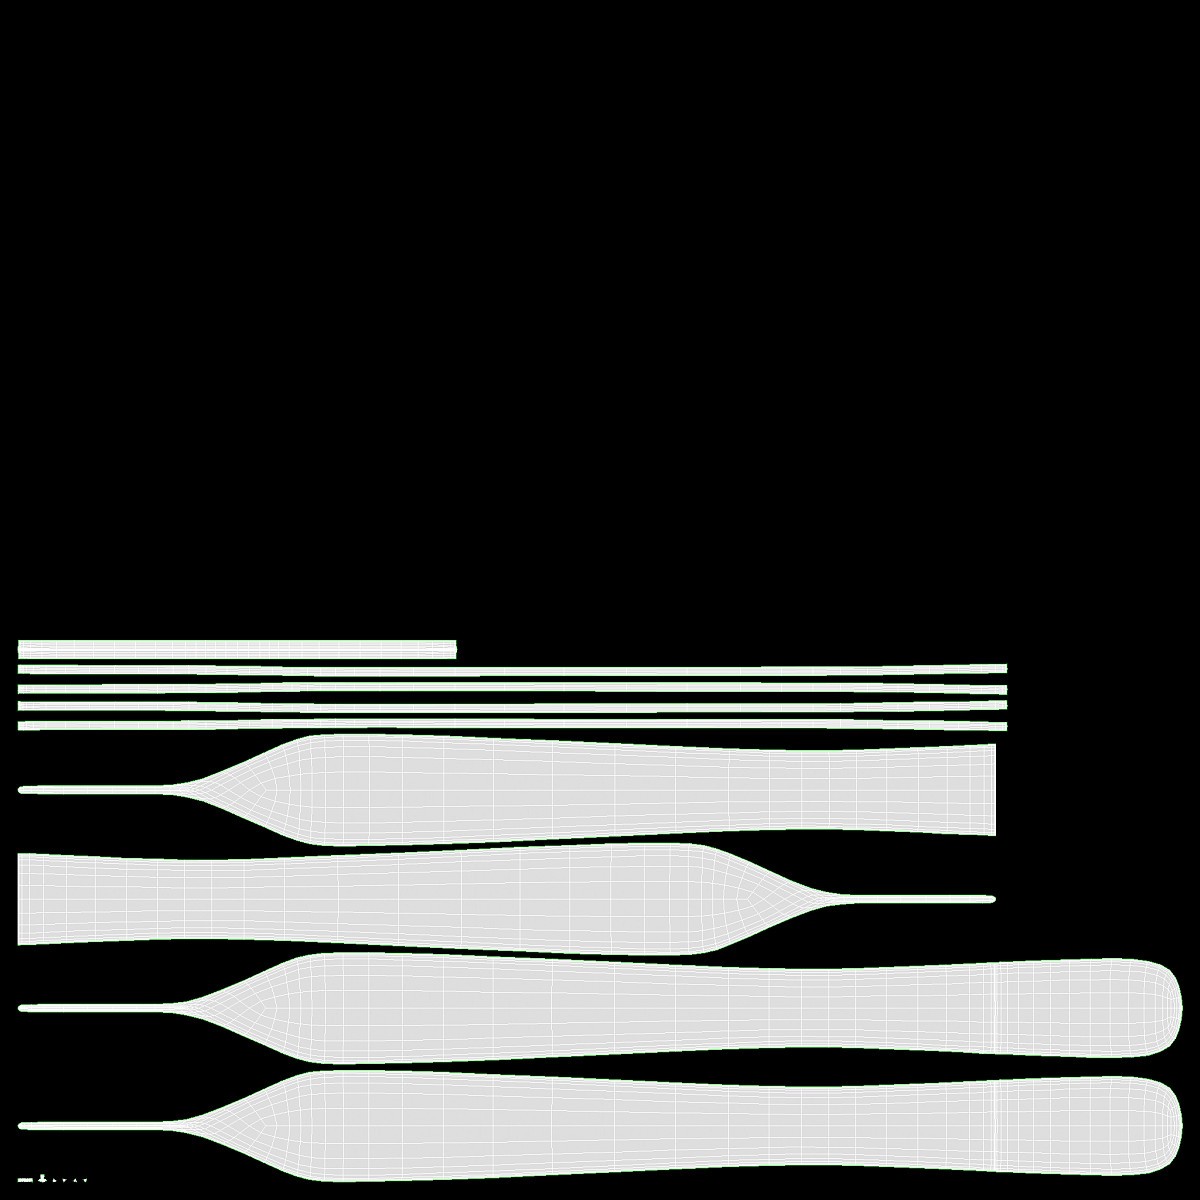 Operating Tissue Forceps Surgical Instrument